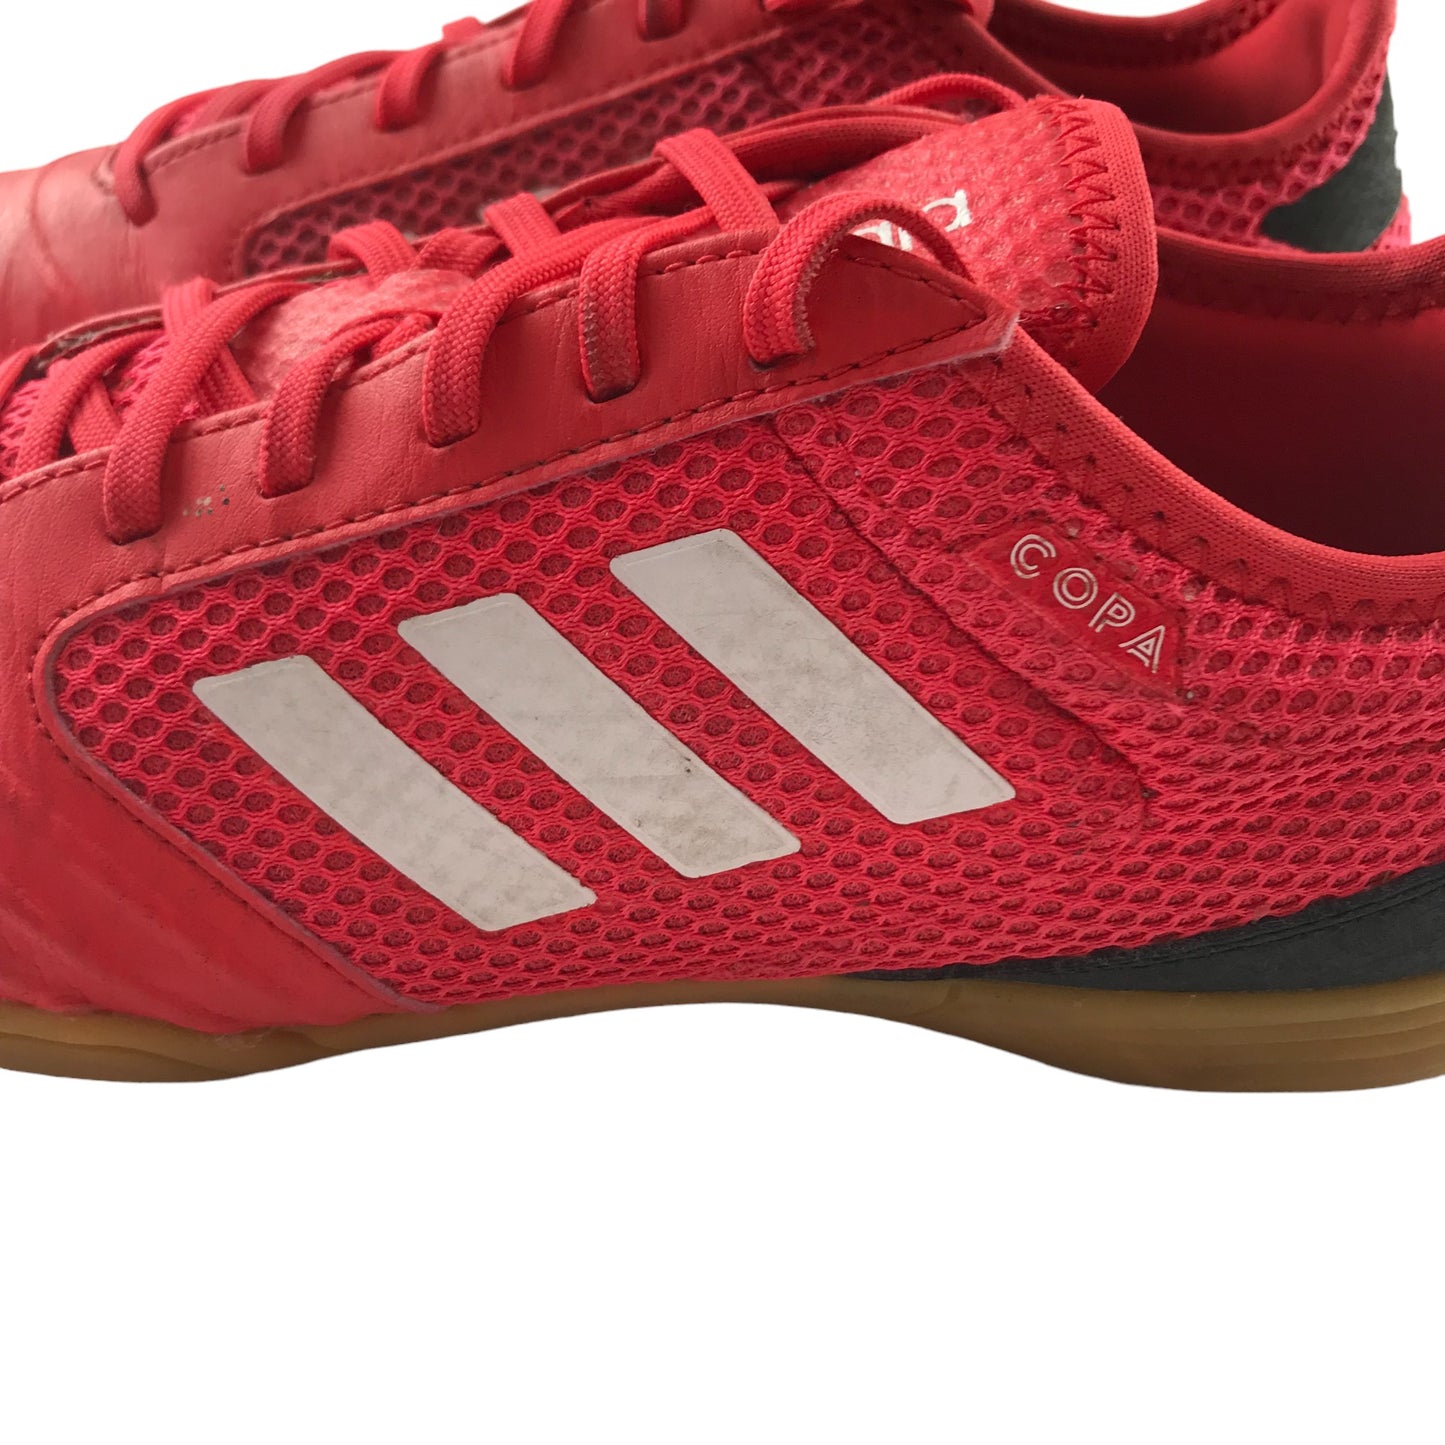 Adidas Copa Football Boots Shoe Size 5 Red Indoors Mesh Design